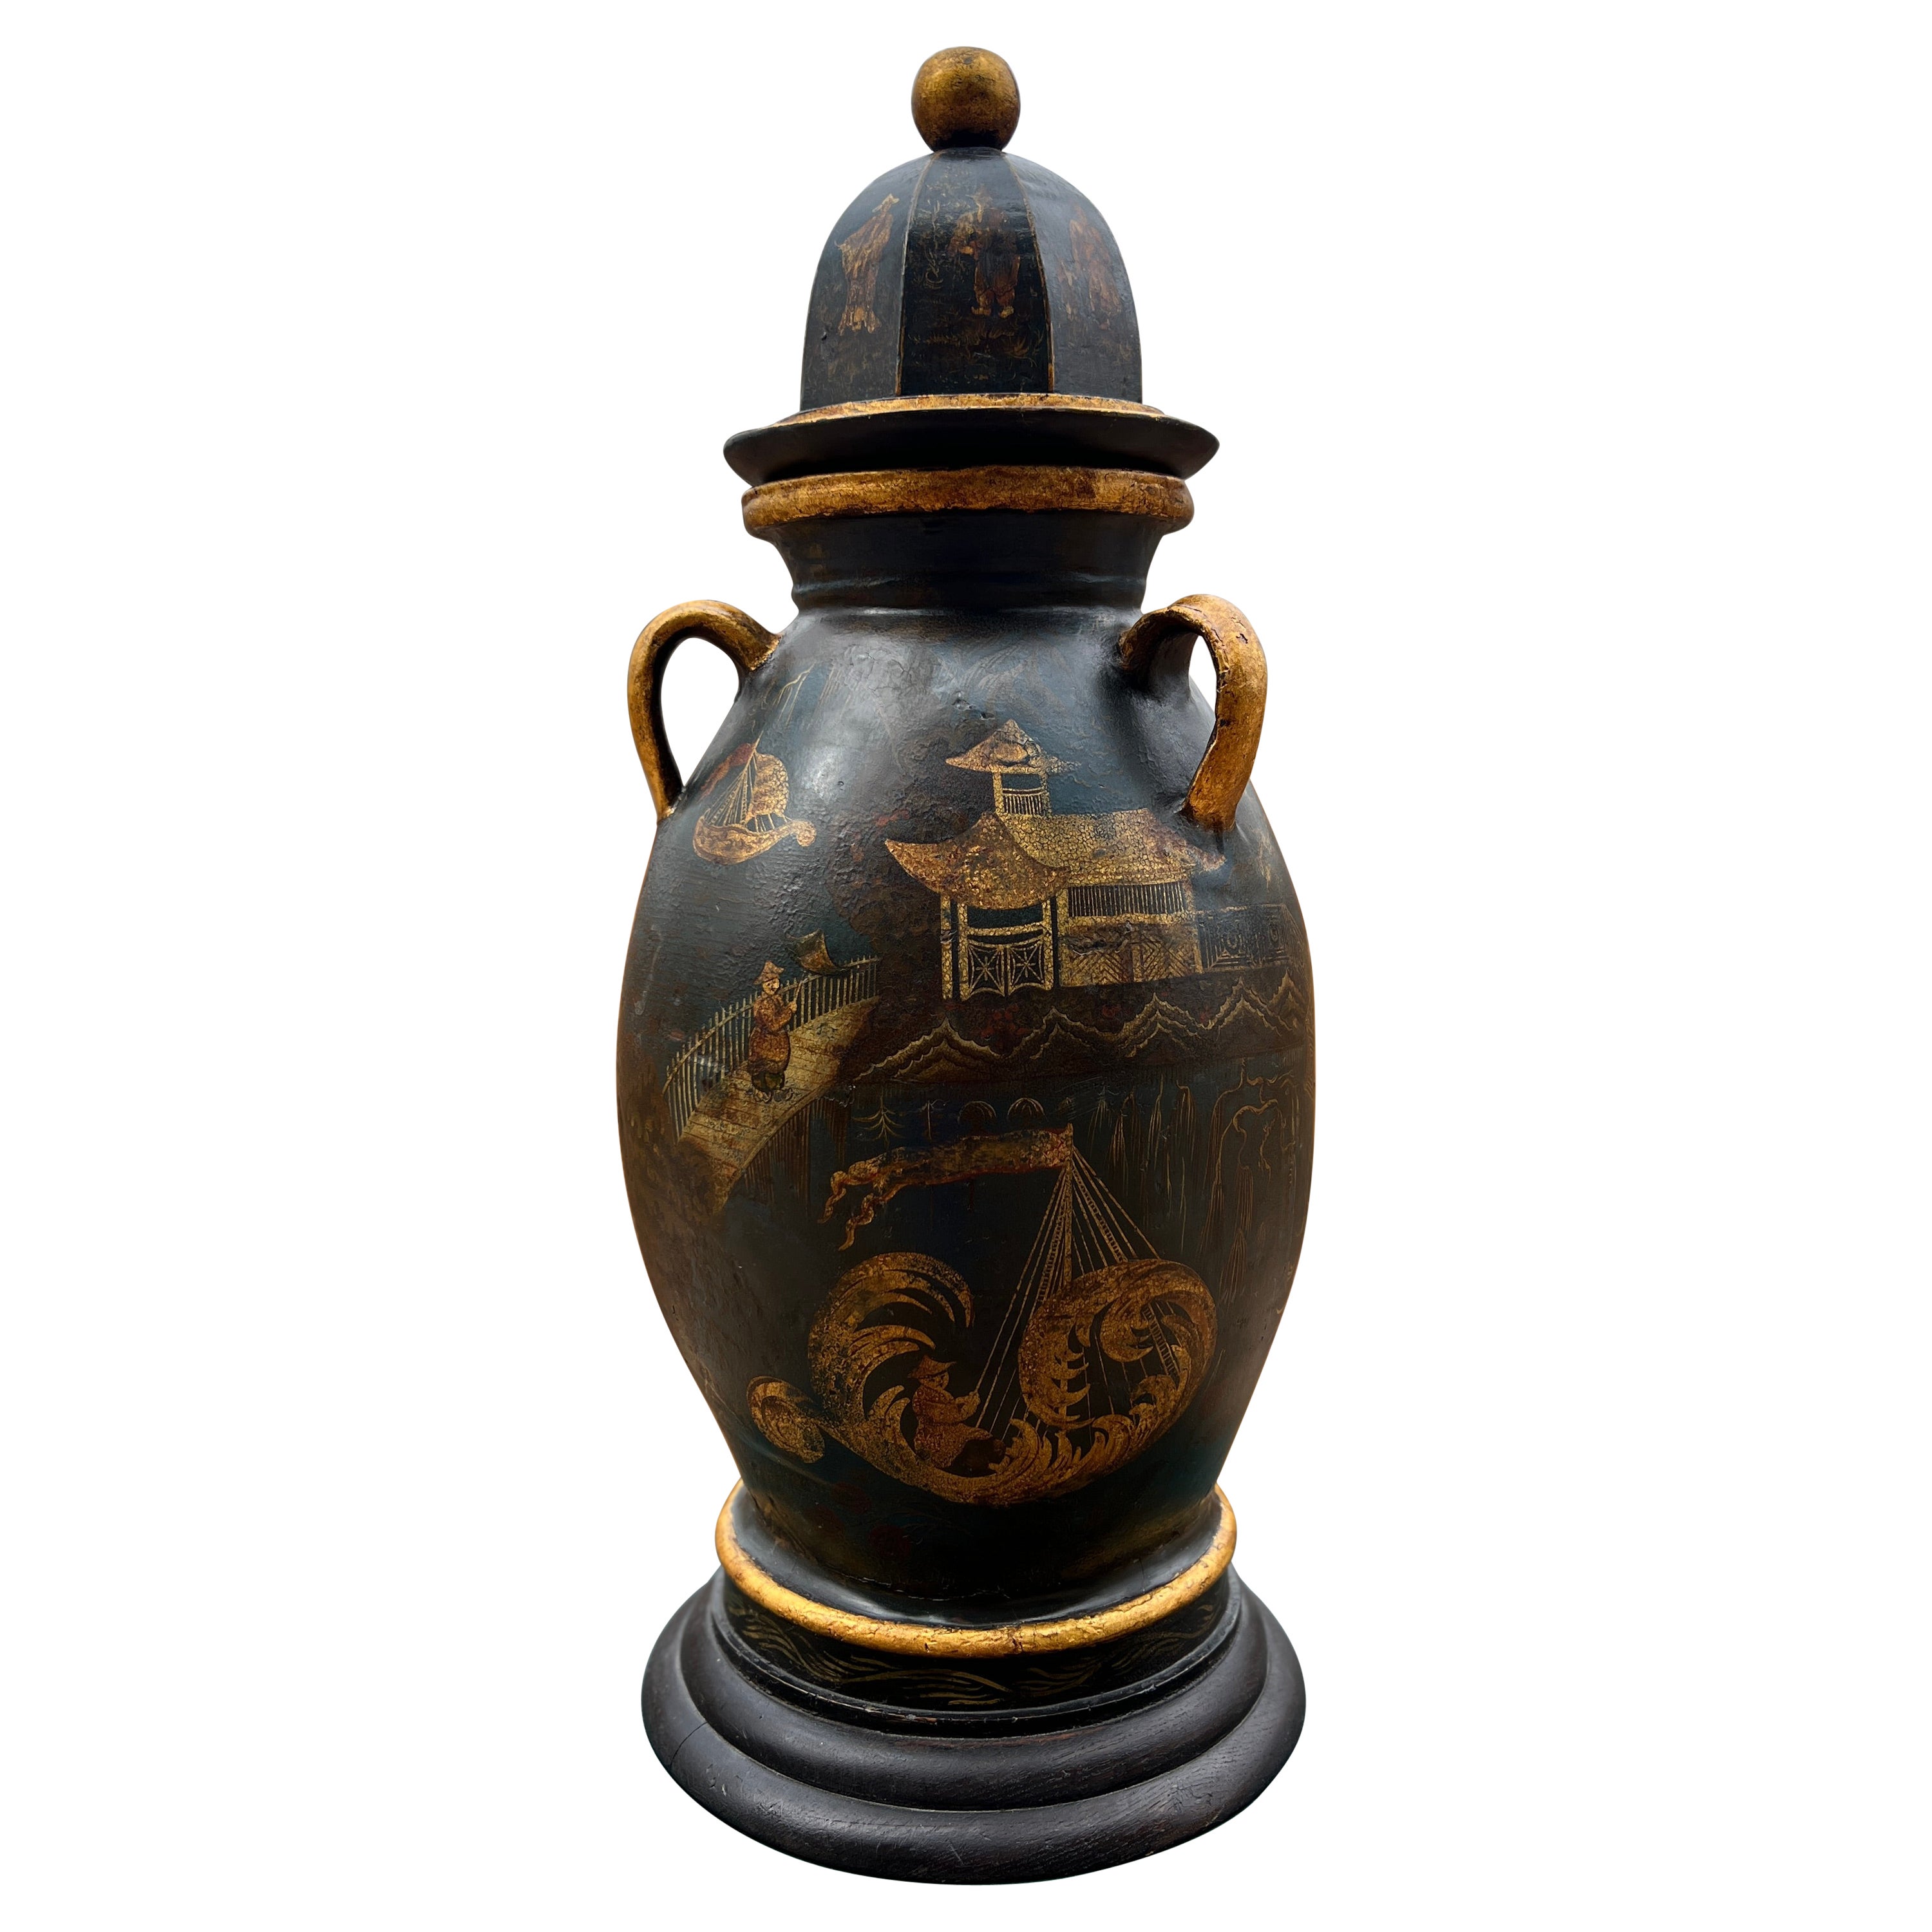 Regency Chinoiserie Decorated Gilt Wood & Tole Handled Urn or Centerpiece C 1820 For Sale